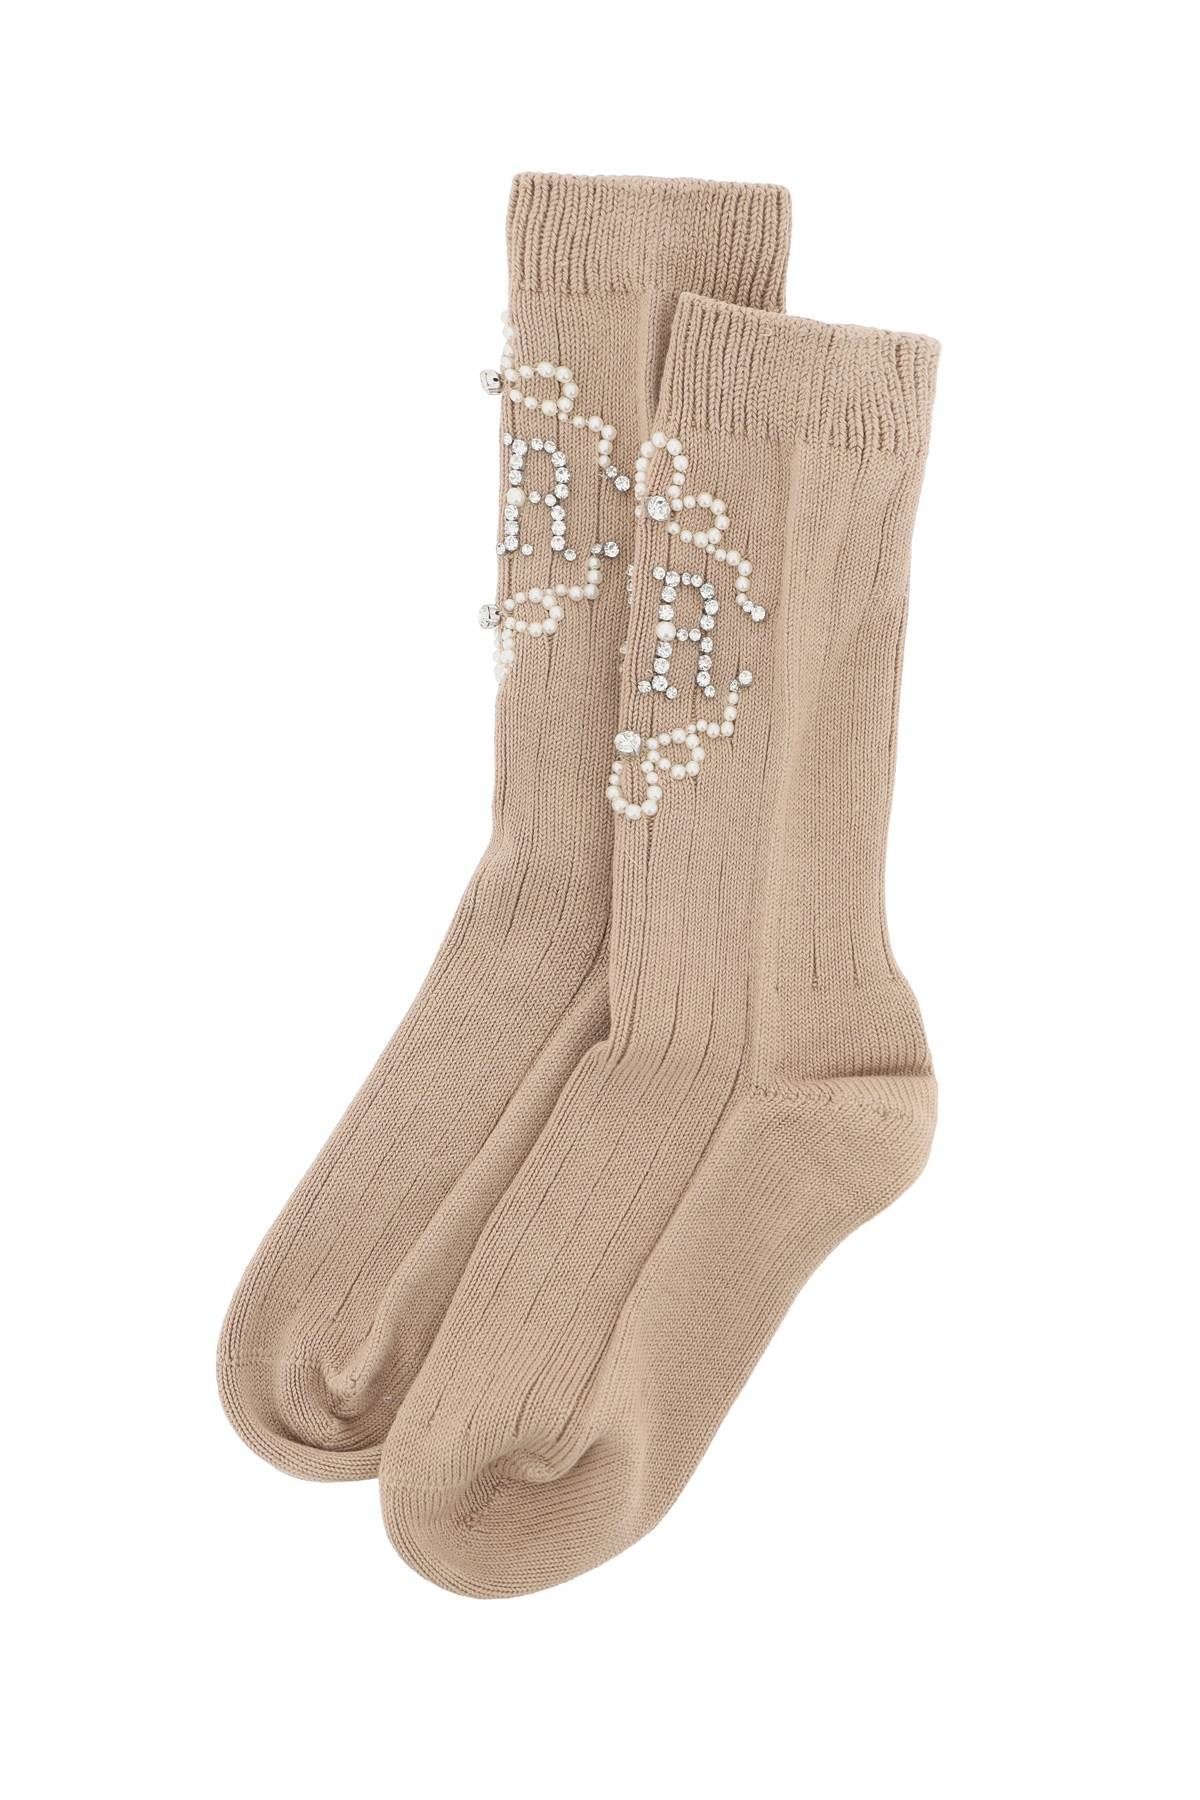 SR SOCKS WITH PEARLS AND CRYSTALS - 2